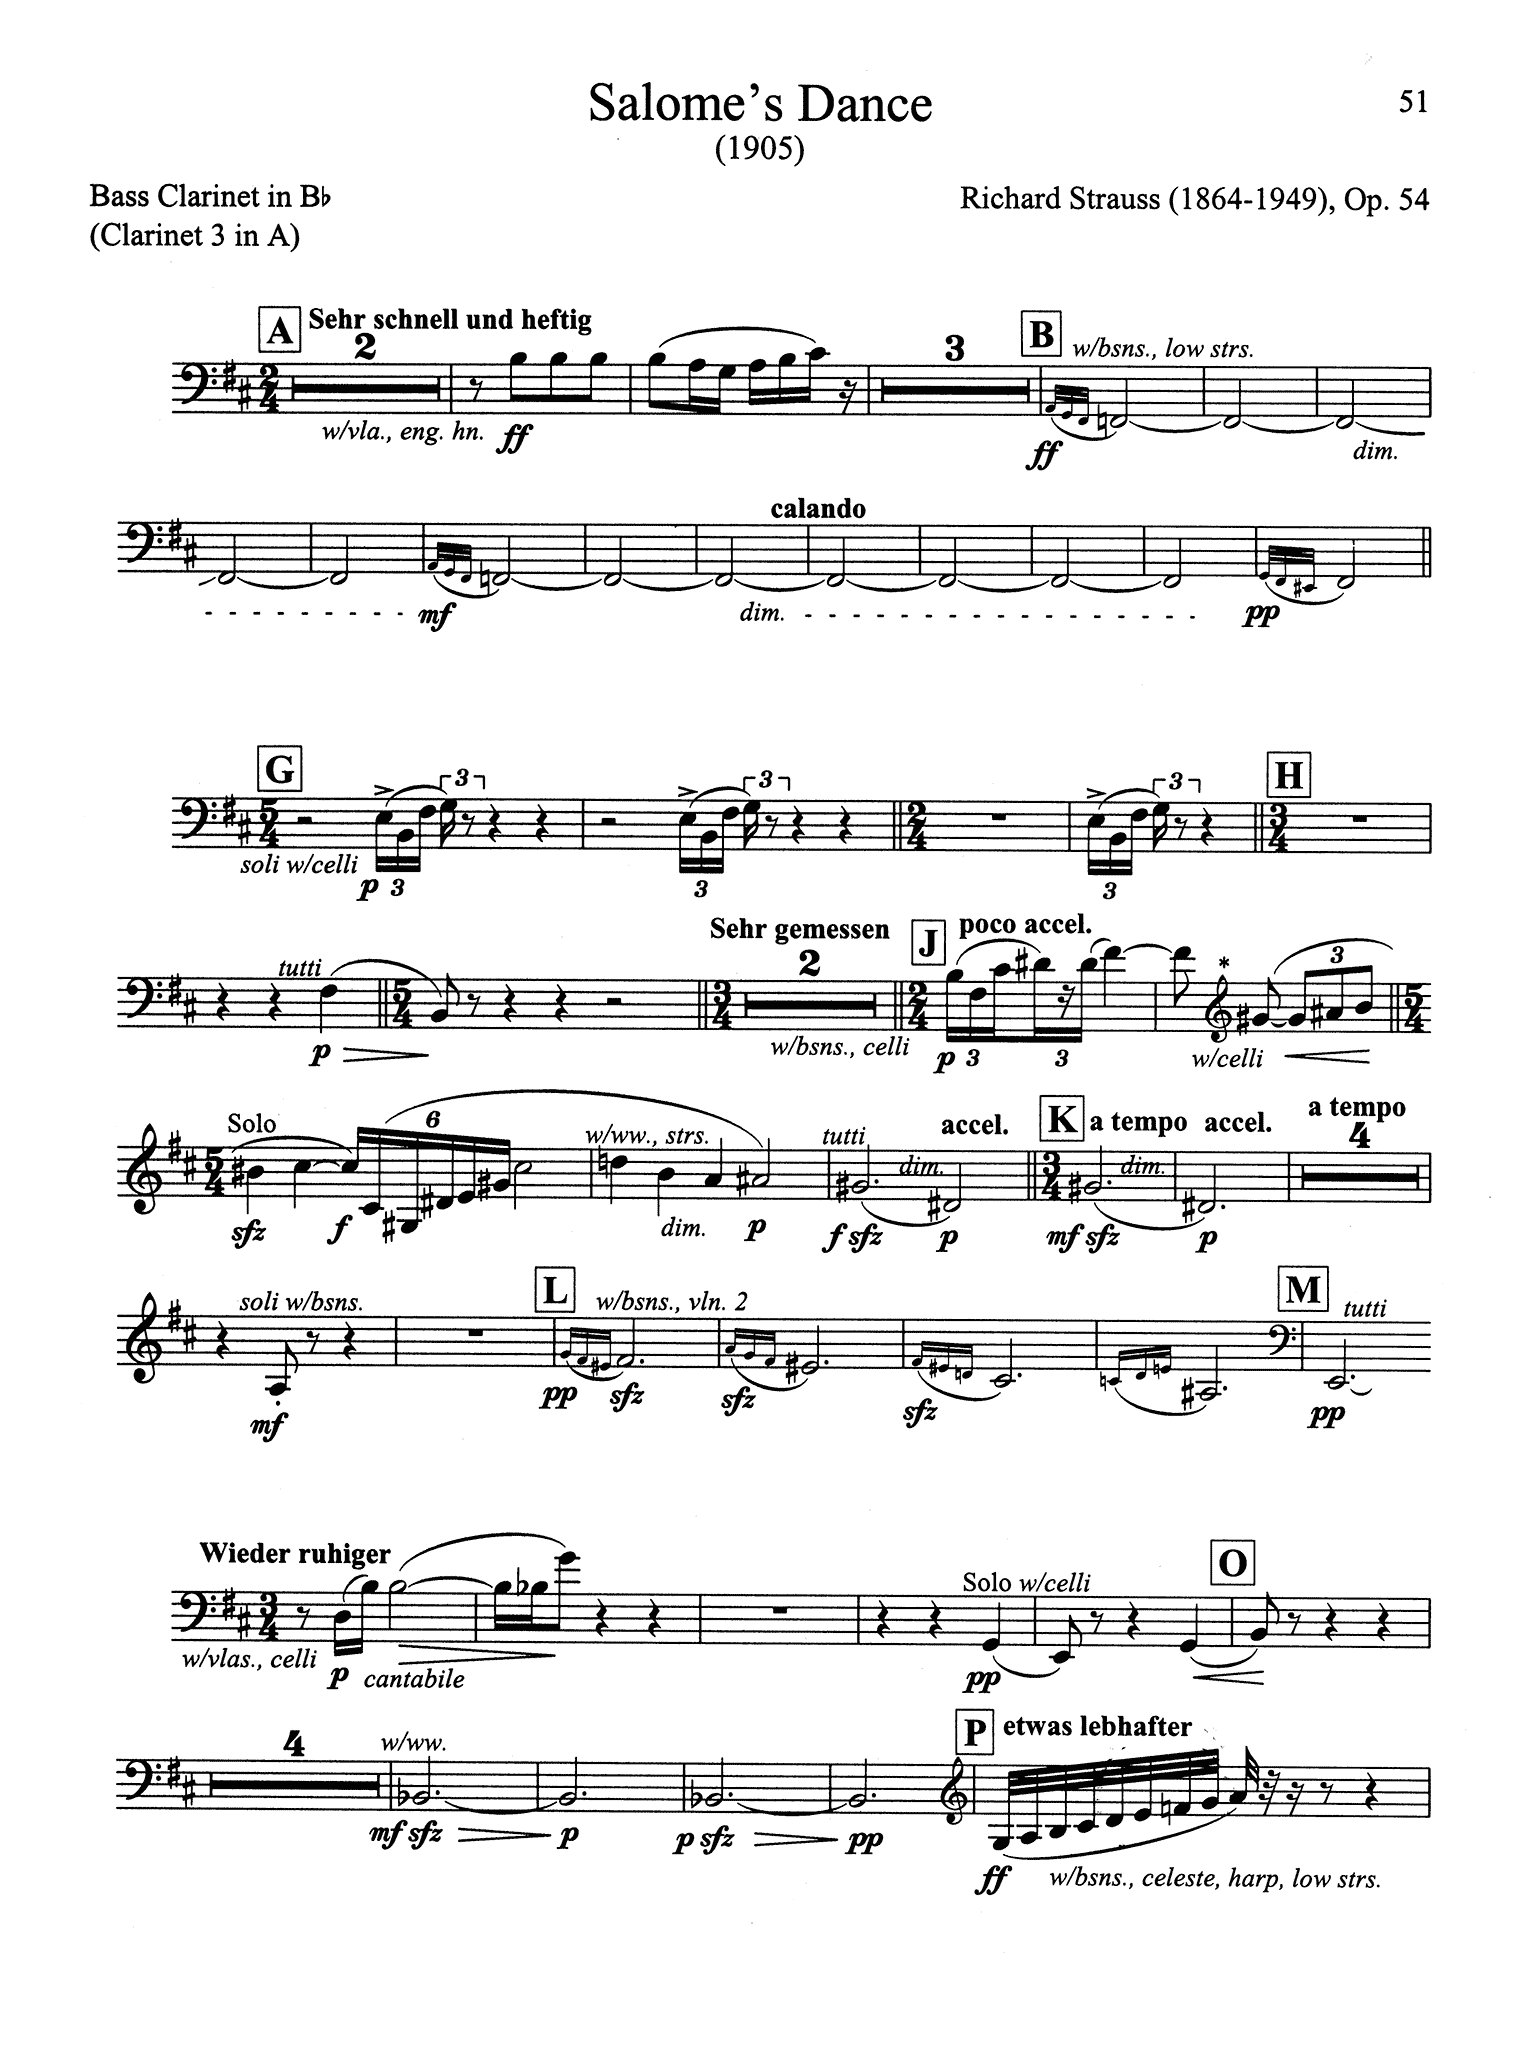 Symphonic Repertoire for the Bass Clarinet, Volume 2 Page 51